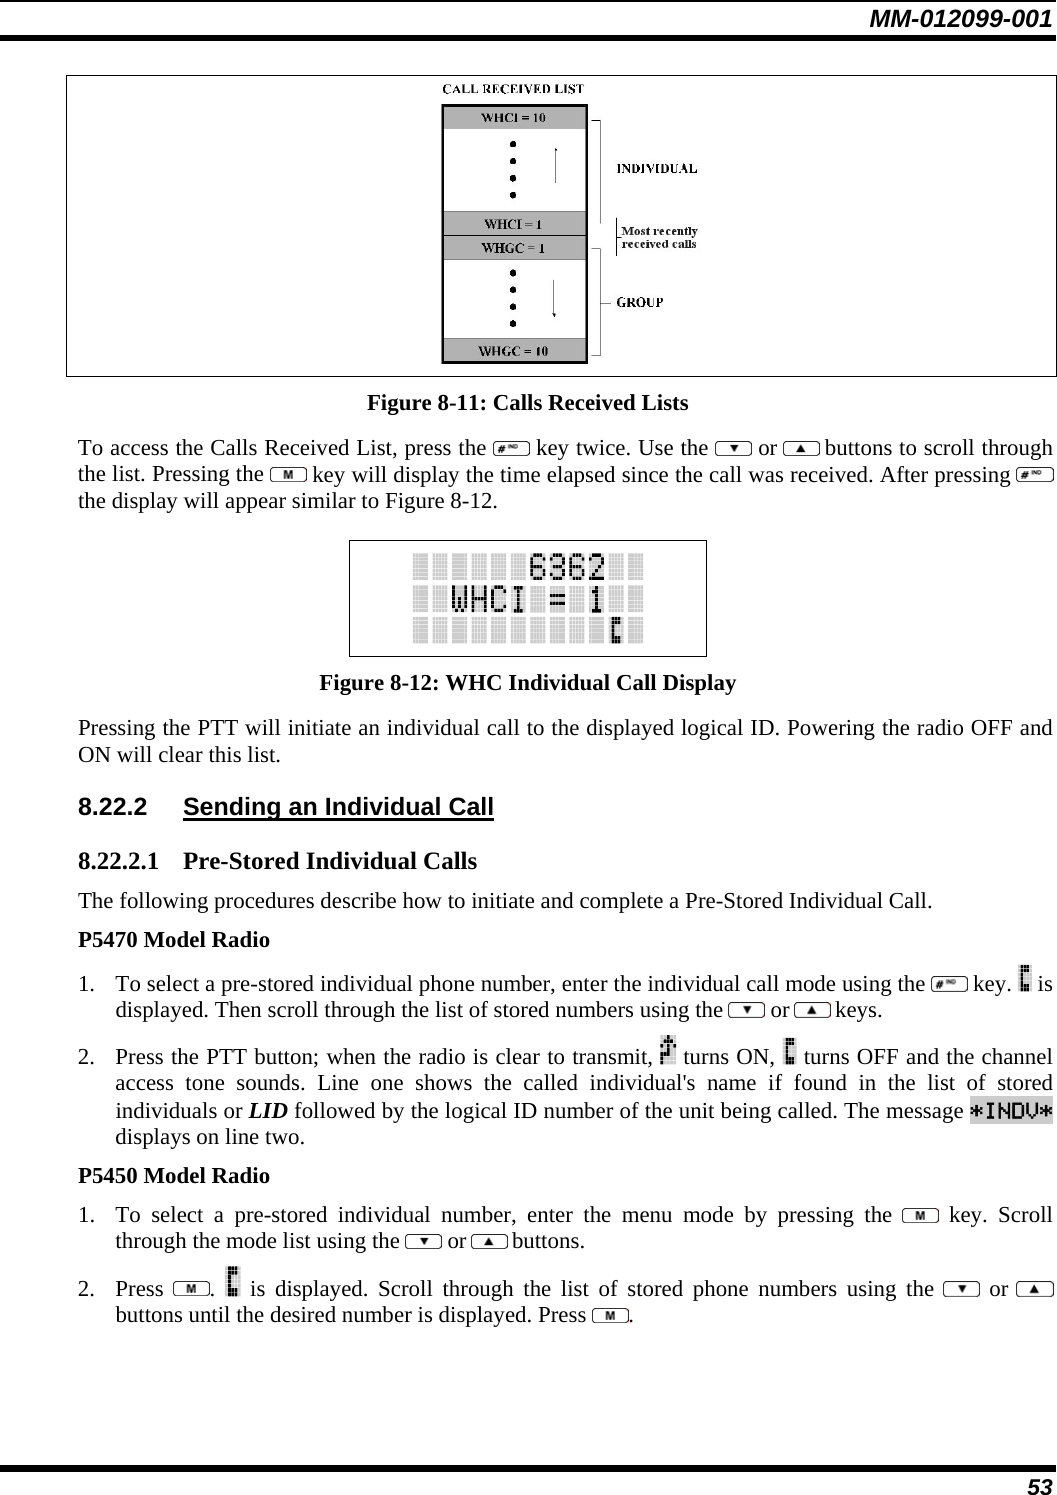 MM-012099-001 53  Figure 8-11: Calls Received Lists To access the Calls Received List, press the   key twice. Use the   or  buttons to scroll through the list. Pressing the   key will display the time elapsed since the call was received. After pressing   the display will appear similar to Figure 8-12.   Figure 8-12: WHC Individual Call Display Pressing the PTT will initiate an individual call to the displayed logical ID. Powering the radio OFF and ON will clear this list. 8.22.2  Sending an Individual Call 8.22.2.1 Pre-Stored Individual Calls The following procedures describe how to initiate and complete a Pre-Stored Individual Call. P5470 Model Radio 1. To select a pre-stored individual phone number, enter the individual call mode using the   key.   is displayed. Then scroll through the list of stored numbers using the   or  keys.  2. Press the PTT button; when the radio is clear to transmit,   turns ON,   turns OFF and the channel access tone sounds. Line one shows the called individual&apos;s name if found in the list of stored individuals or LID followed by the logical ID number of the unit being called. The message *INDV* displays on line two. P5450 Model Radio 1. To select a pre-stored individual number, enter the menu mode by pressing the   key. Scroll through the mode list using the   or  buttons.  2. Press  .   is displayed. Scroll through the list of stored phone numbers using the   or  buttons until the desired number is displayed. Press  . 